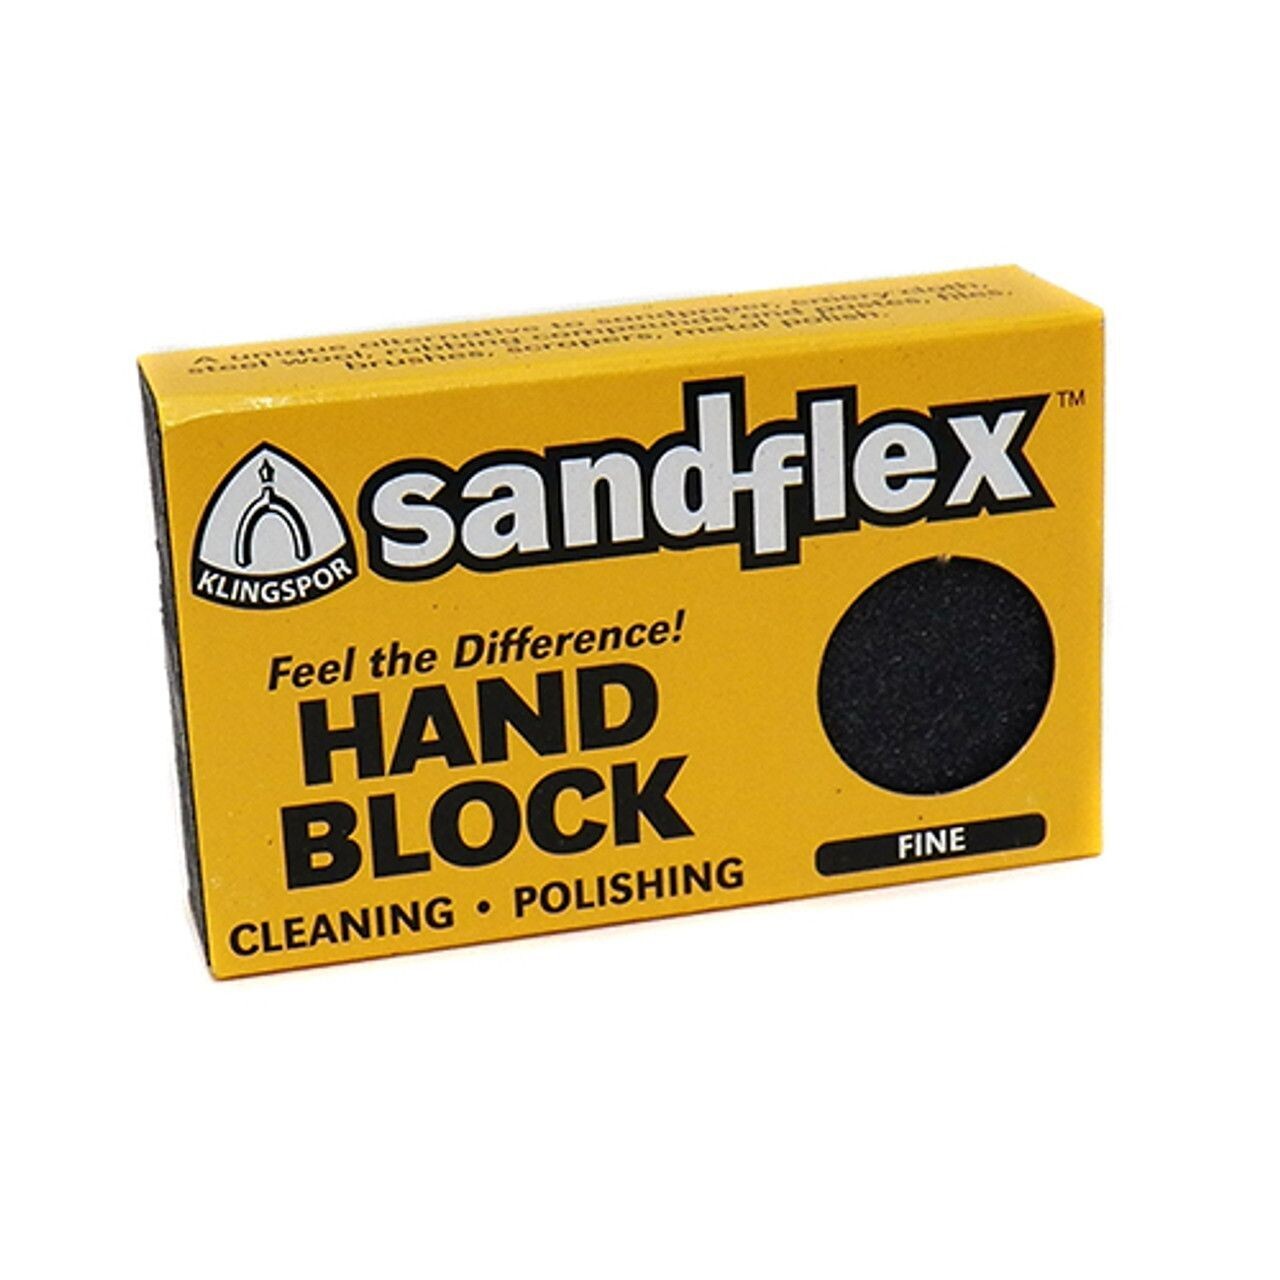 SANDFLEX "ABRASER" RUST REMOVER ; FINE wet/dry abrasive pad removes rust from rails and other surfaces, and polishes; 240 grit.